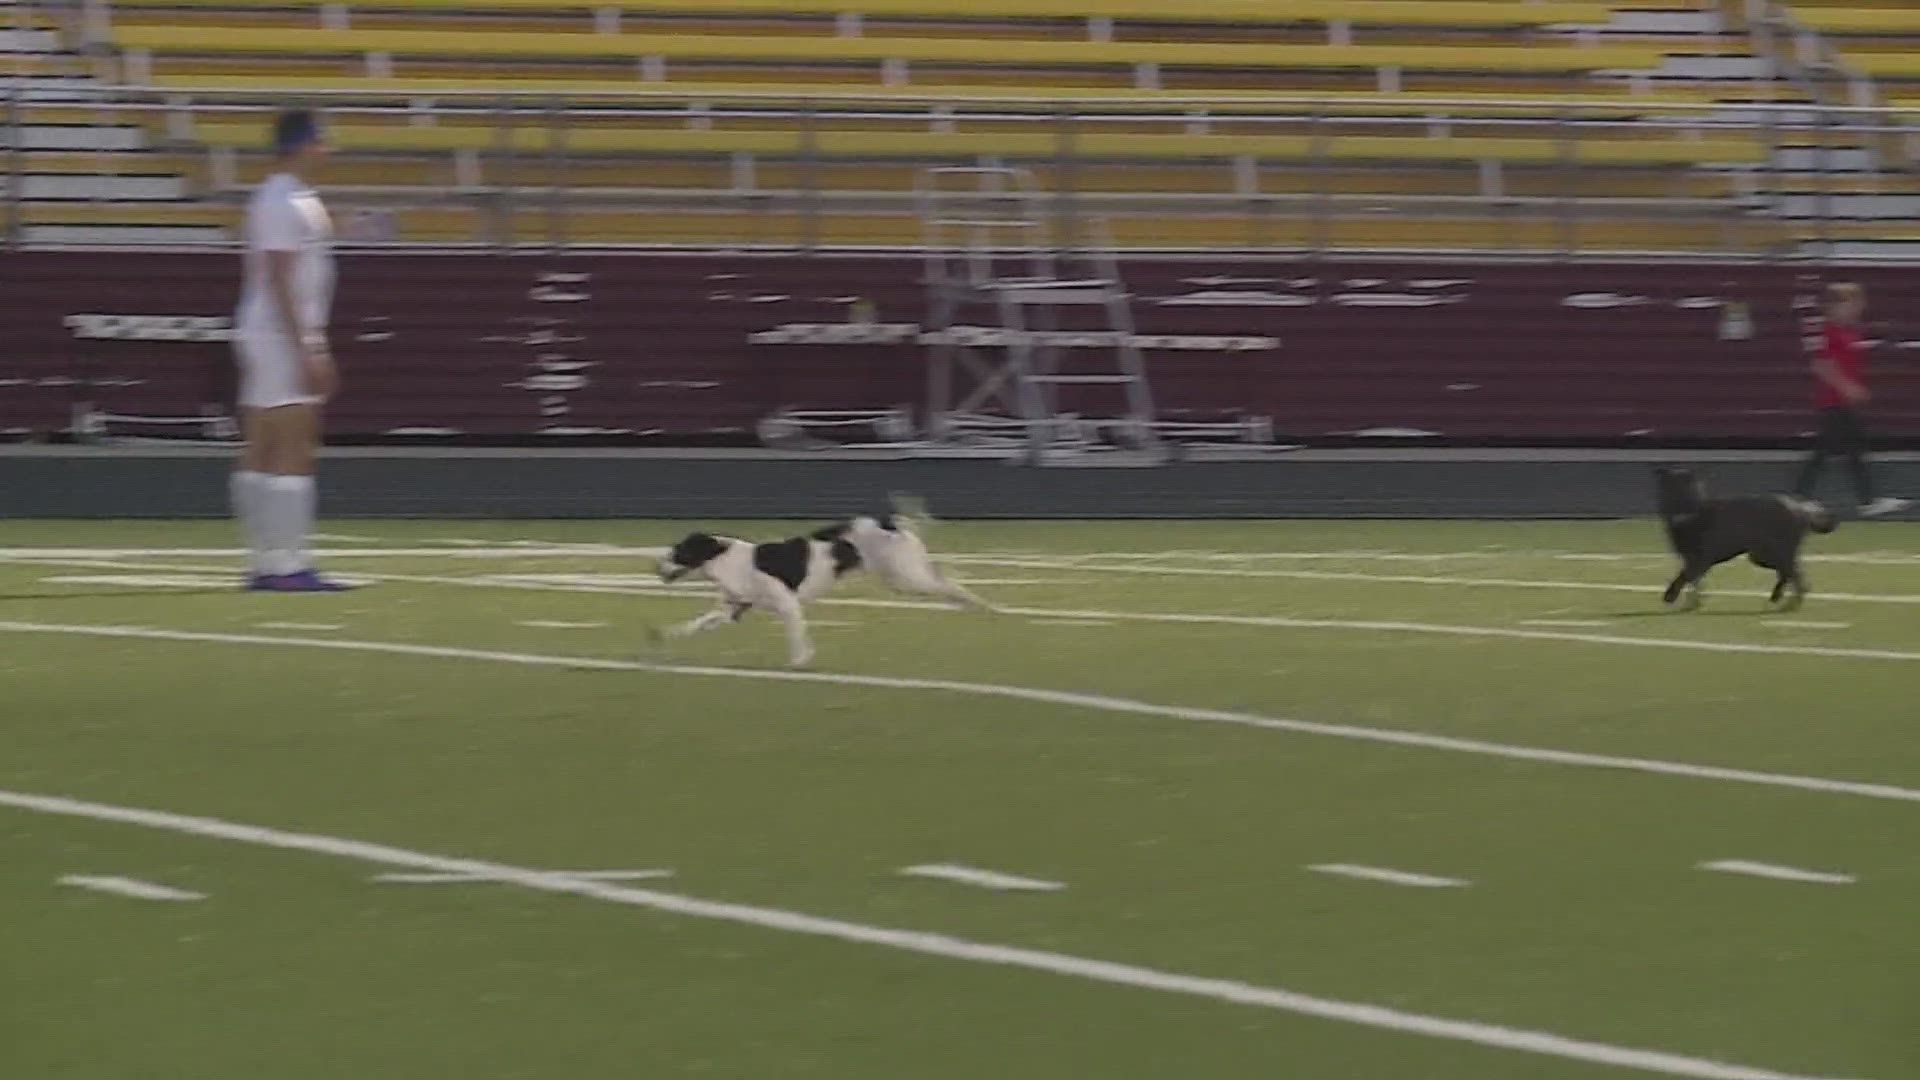 The doggies interrupted a high school soccer game in North Dakota. One just wanted a belly rub.